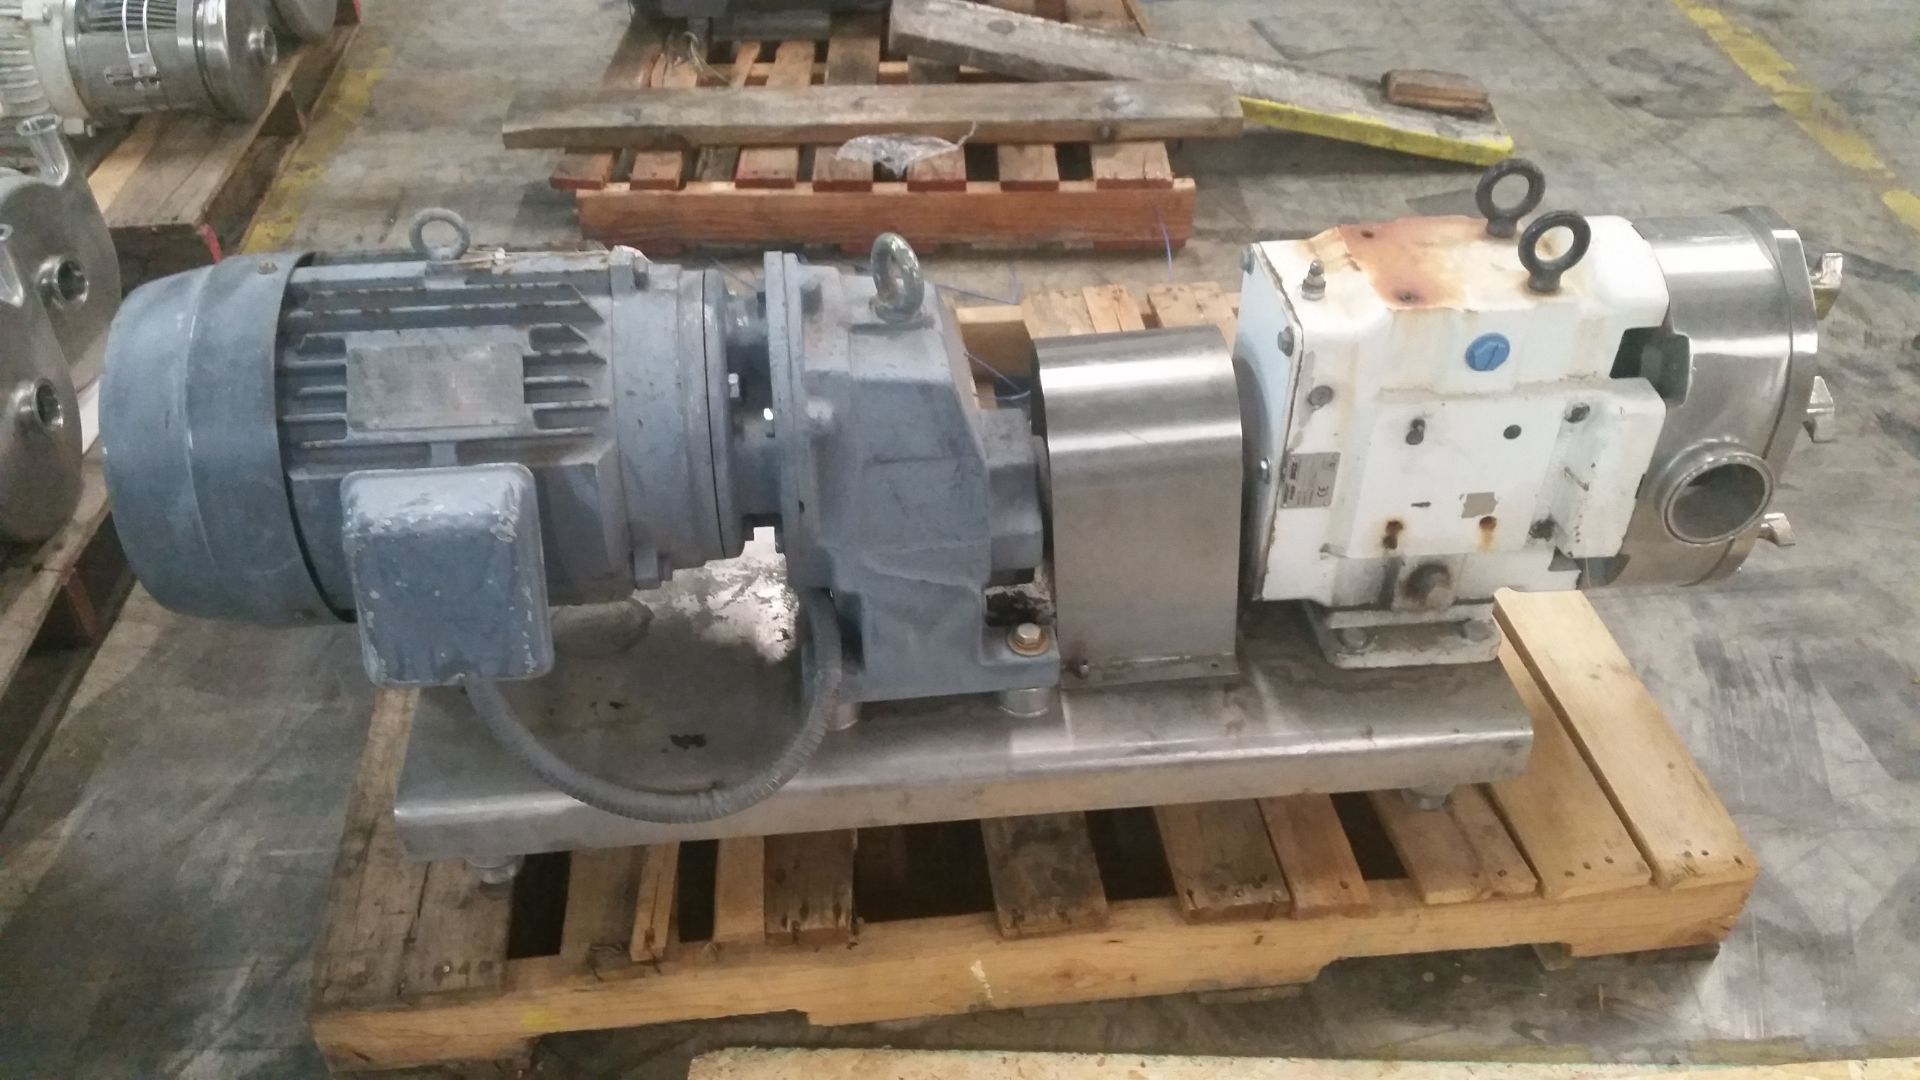 WrightFlow Positive Displacement Pump Model: 0600 Serial: 07G5000, Stainless Steel Construction, - Image 2 of 6